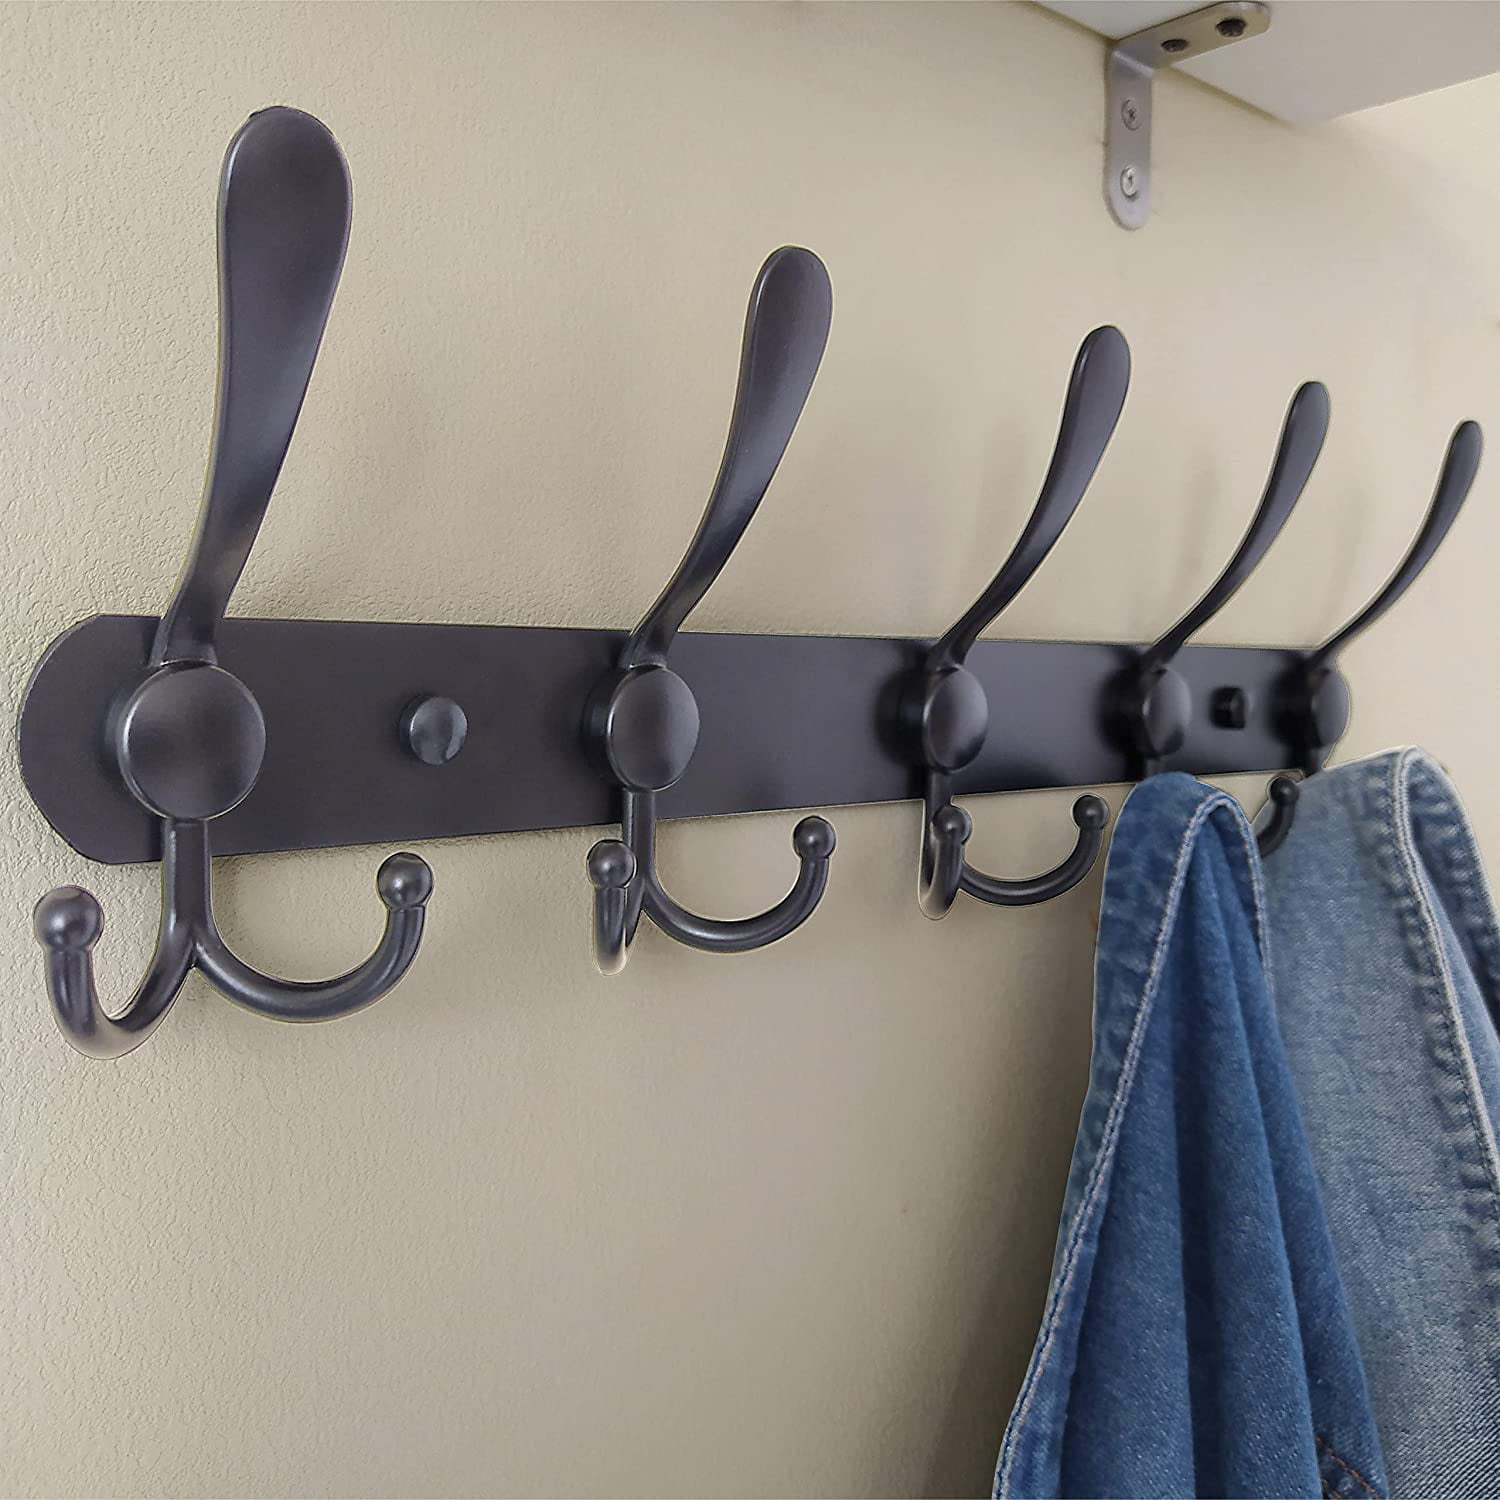 TICONN Wall Mounted Coat Rack, Five Heavy Duty Tri Hooks All Metal  Construction for Jacket Coat Hat in Mudroom Entryway (Matte Black, 2-Pack)